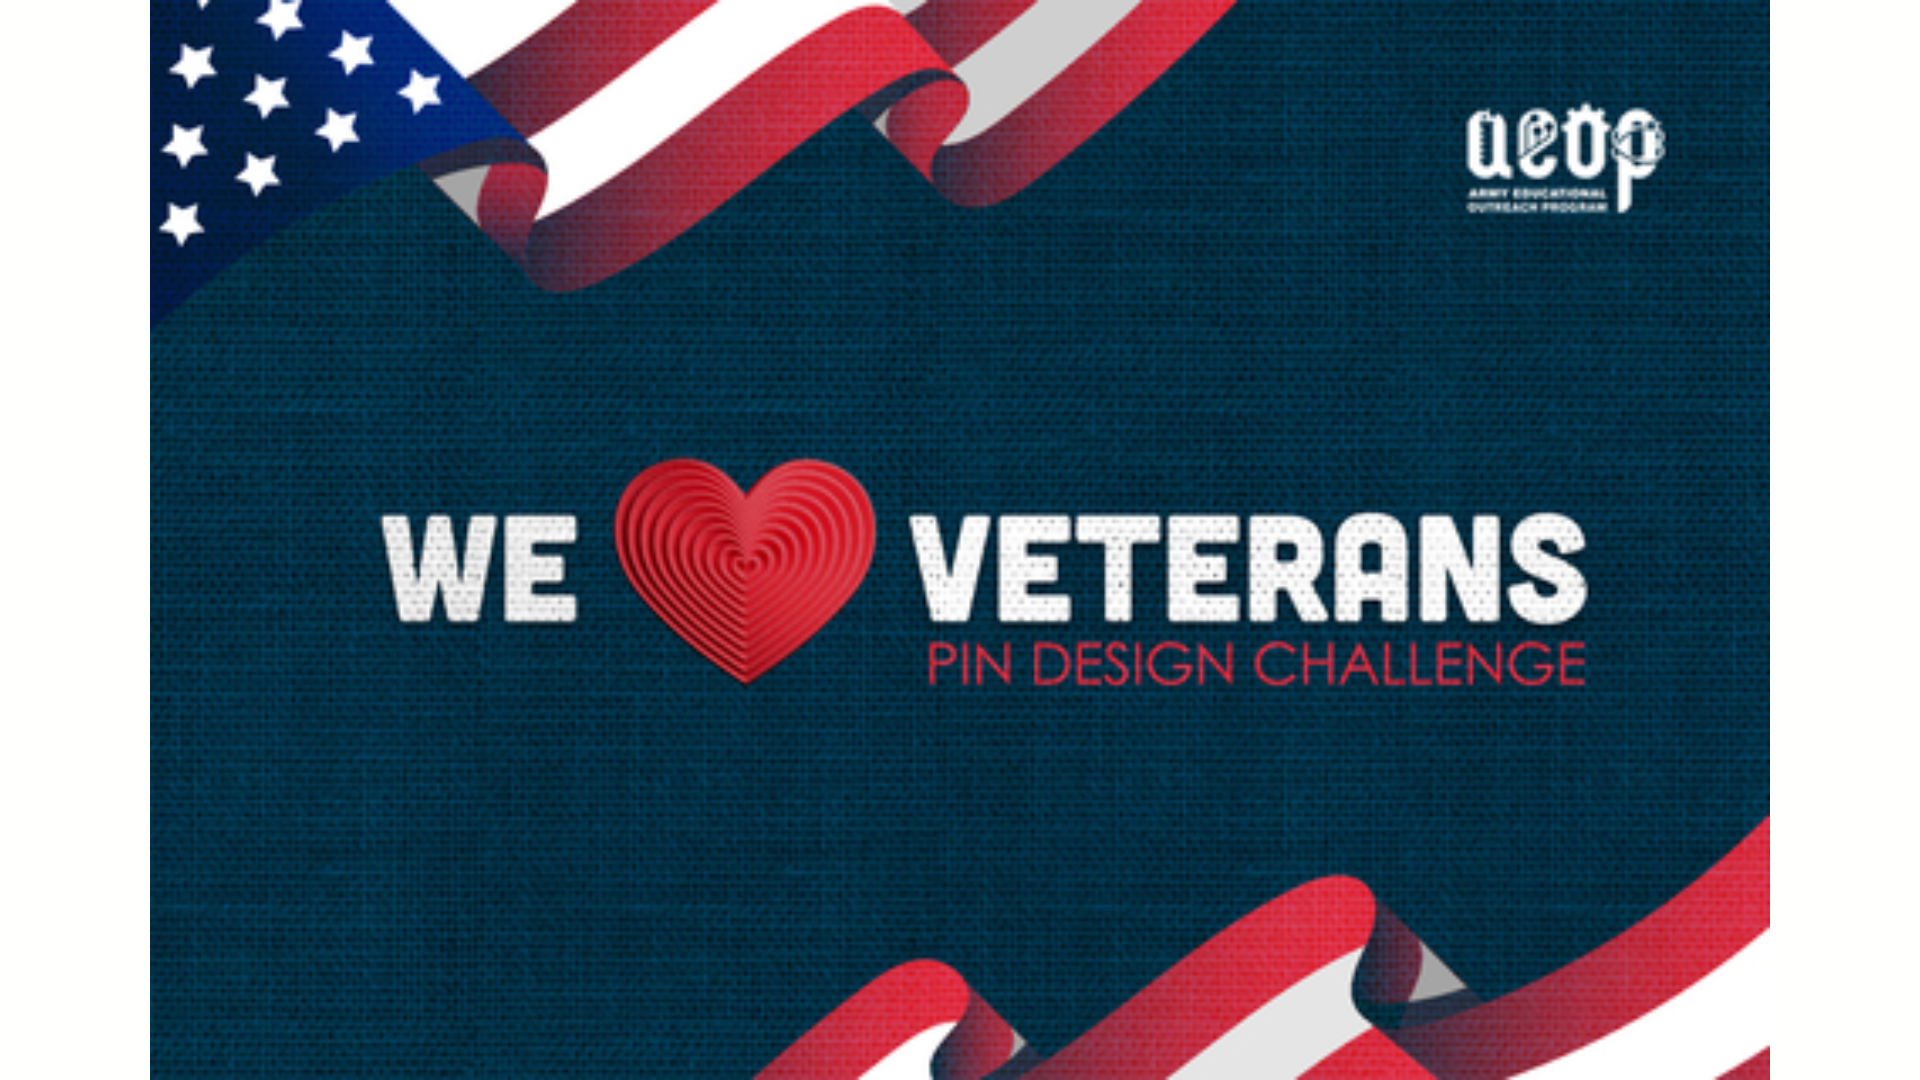 The “We (Heart) Veterans Pin Design” challenge is back, inviting 4-12th grade students to put their 3D design skills to the test